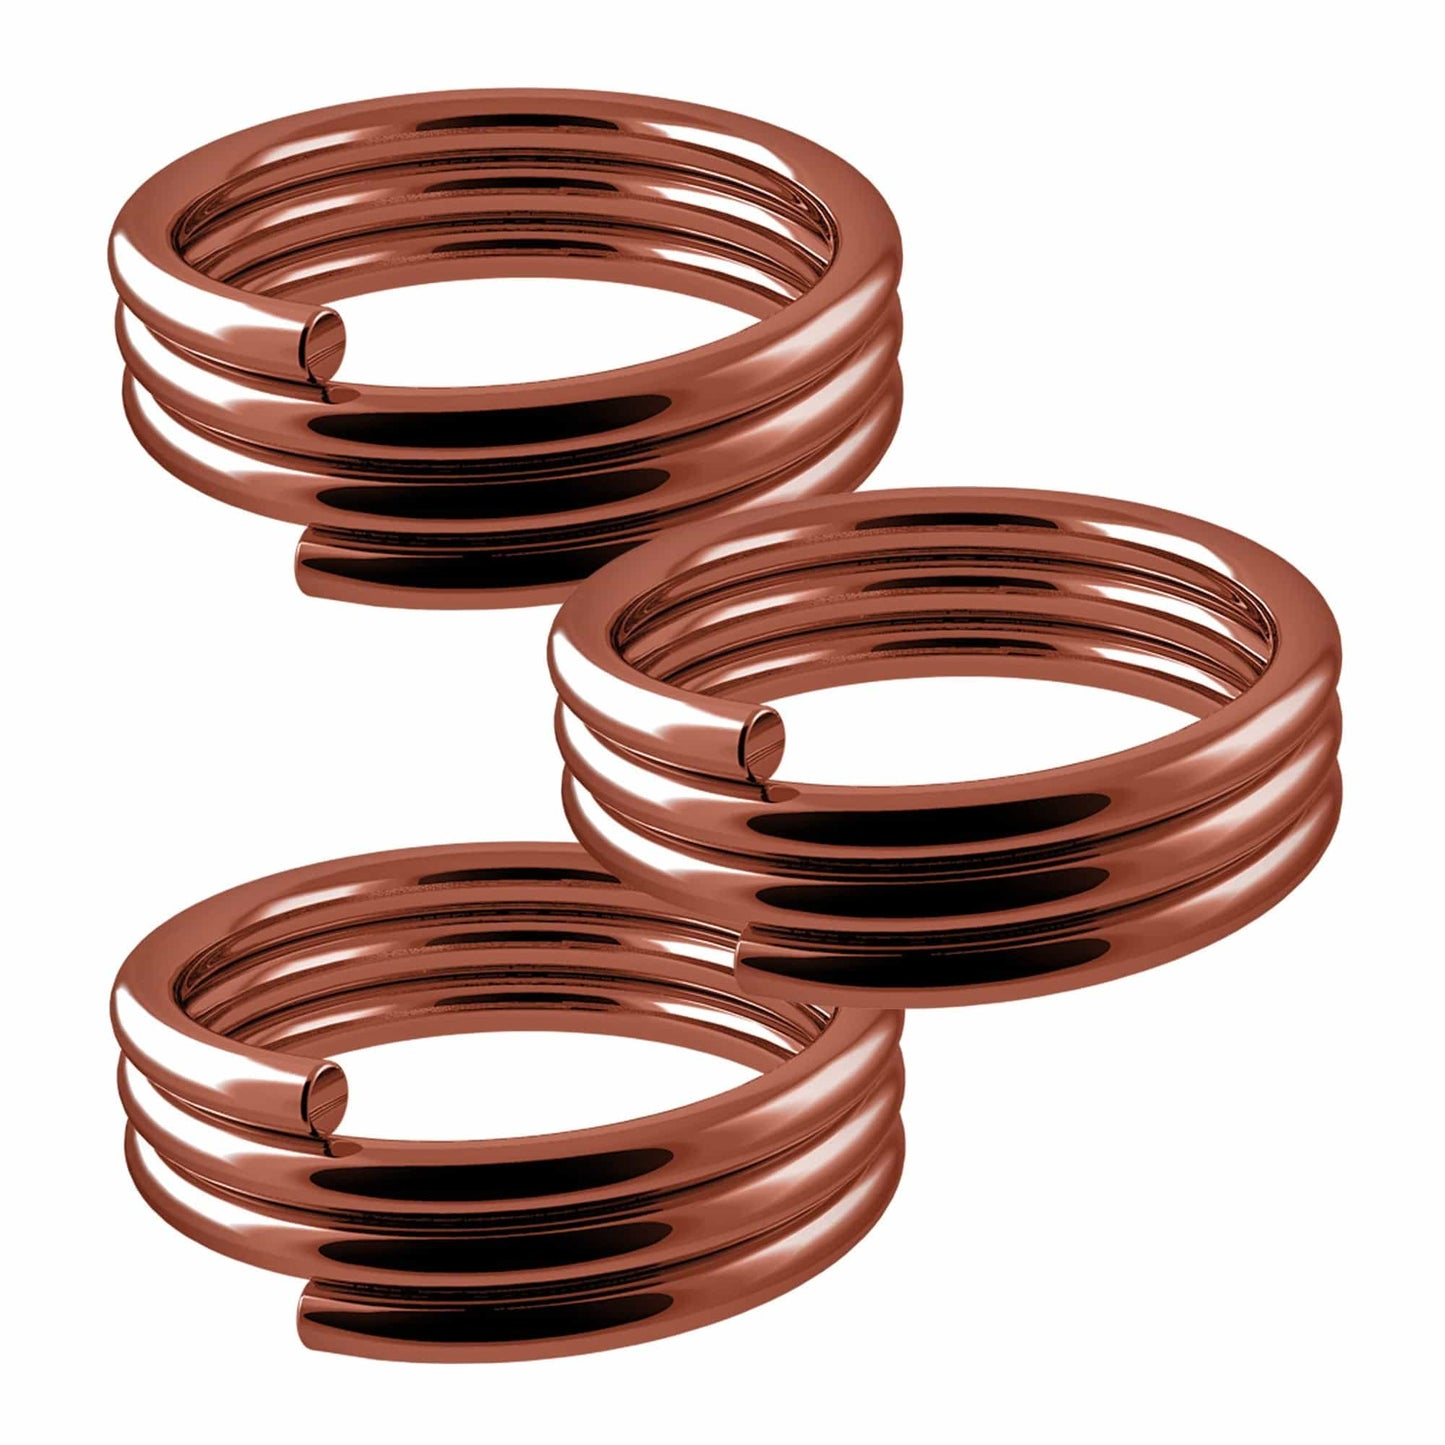 Designa Springs - for use with Nylon Shafts - 50 Sets (150) Bronze